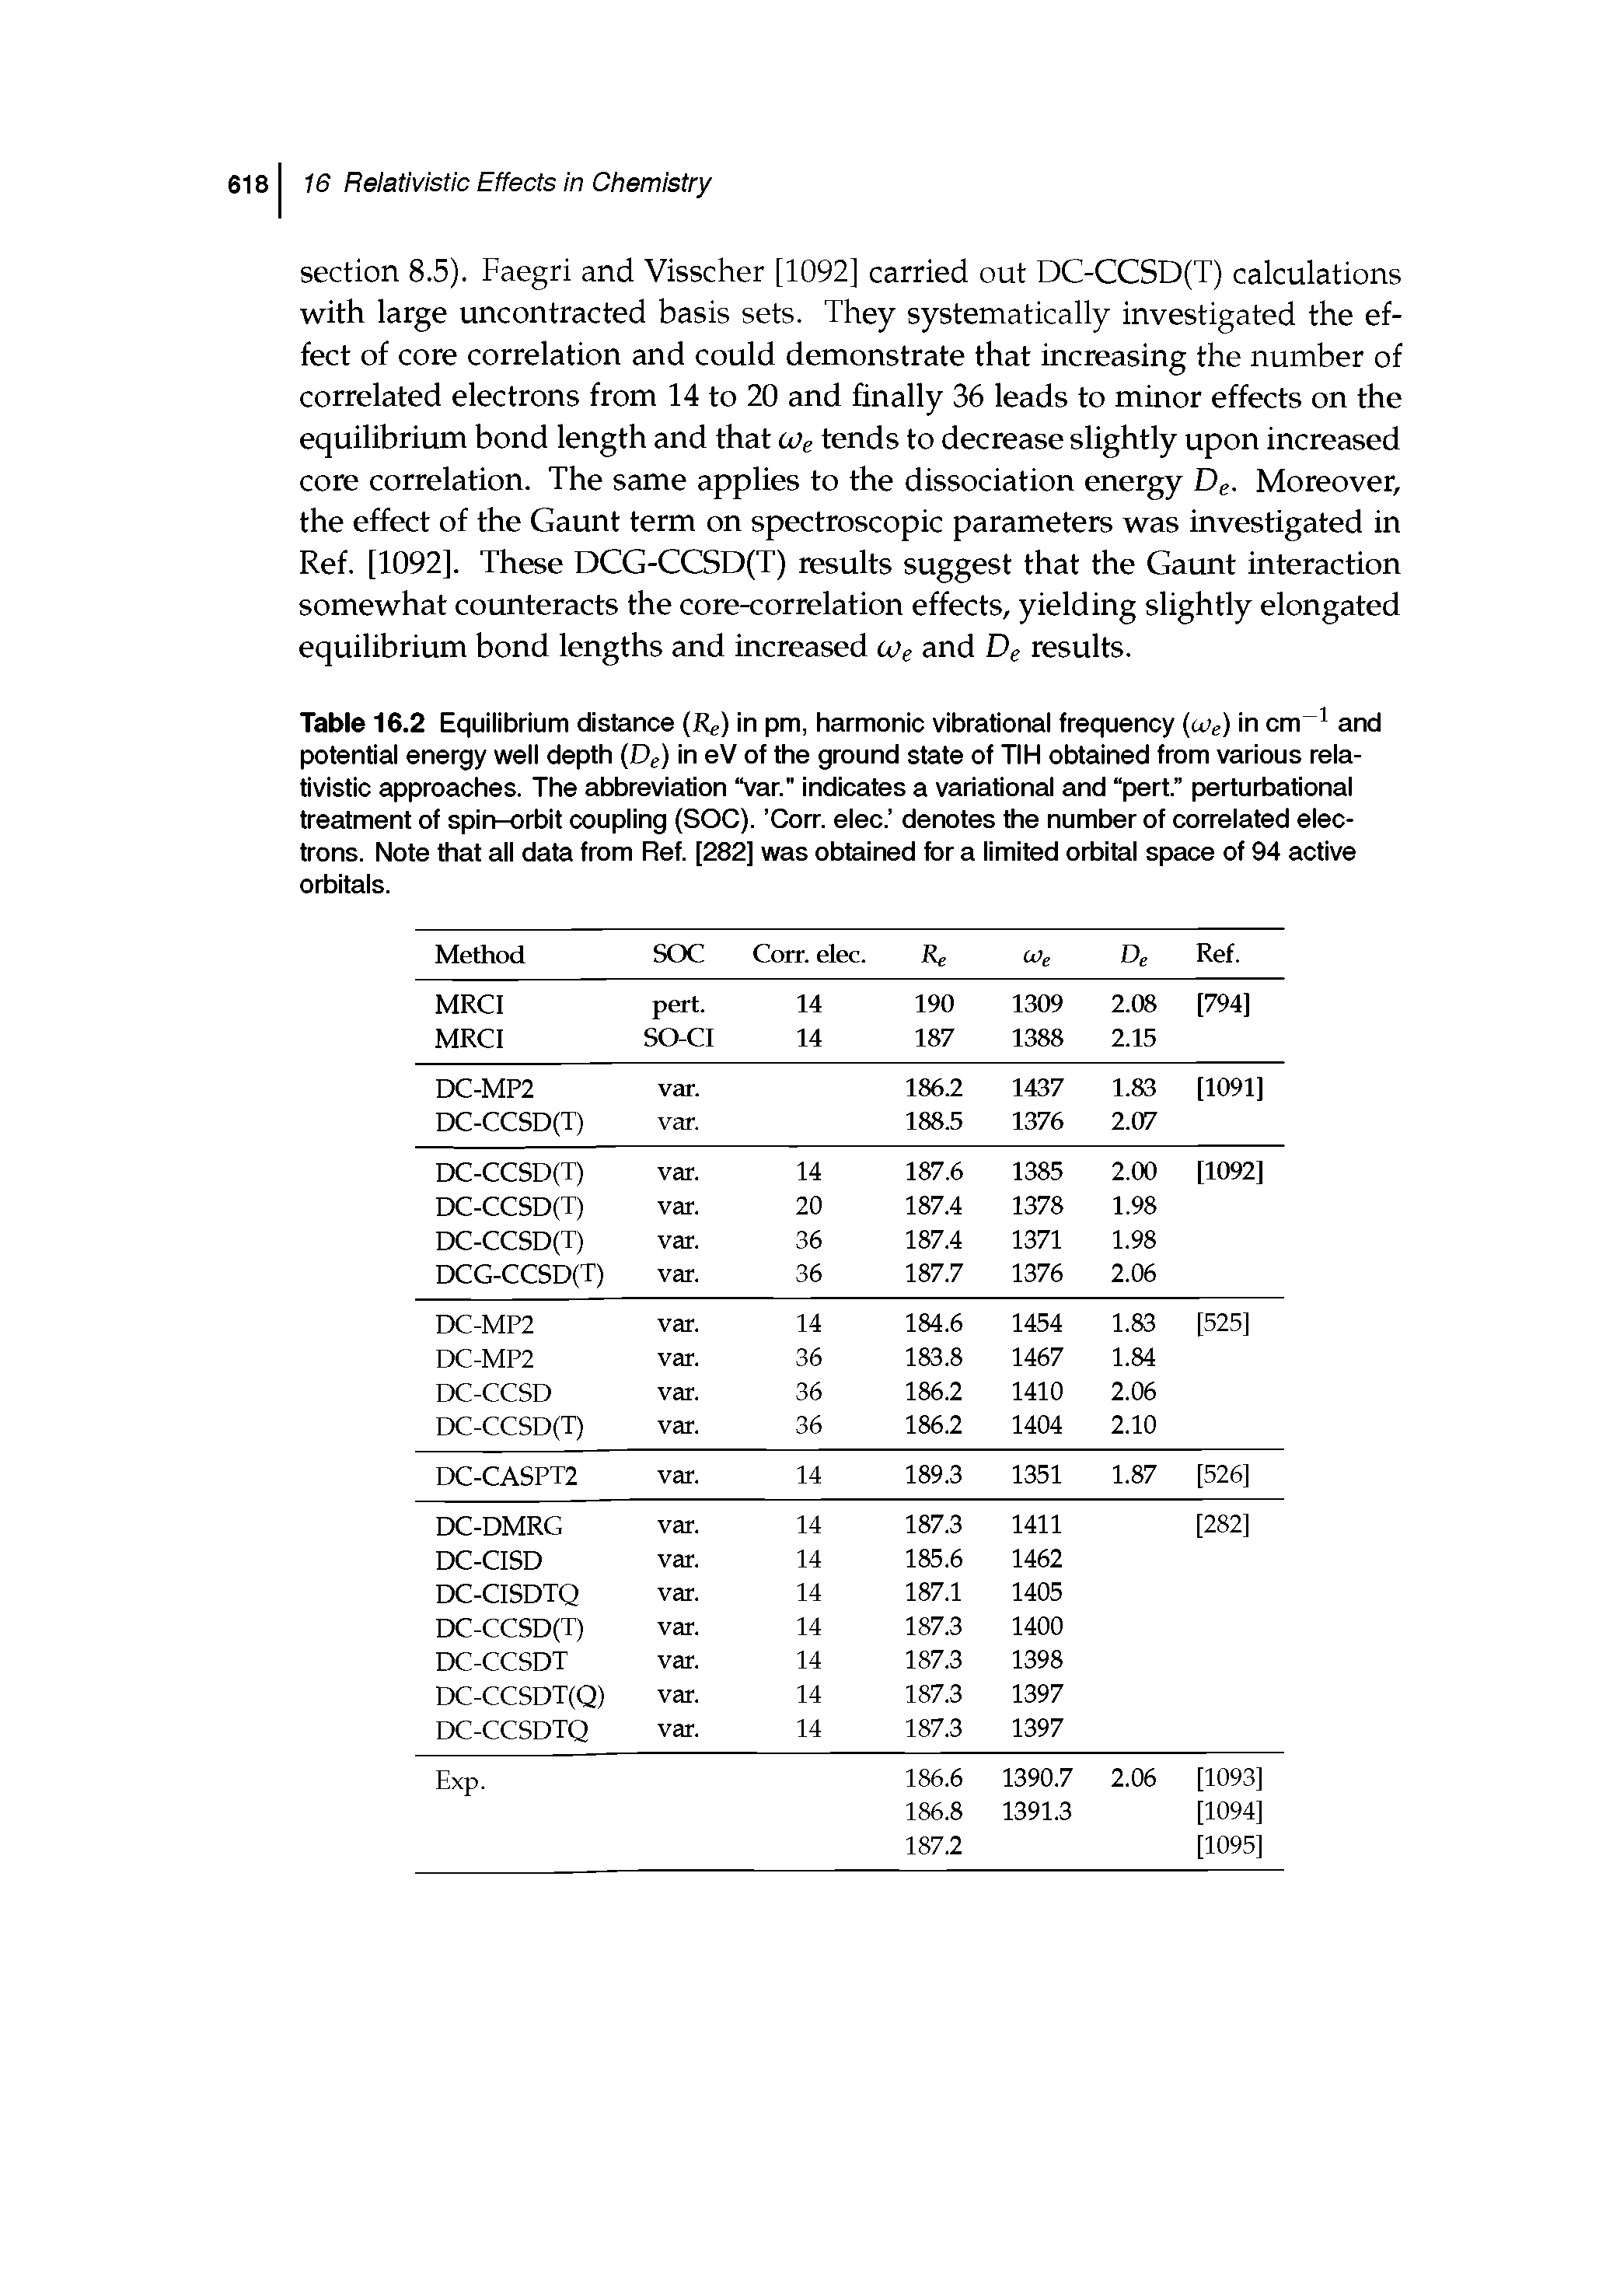 Table 16.2 Equilibrium distance (Re) in pm, harmonic vibrational frequency (u)e) in cm and potential energy well depth (De) in eV of the ground state of TIH obtained from various relativistic approaches. The abbreviation var." indicates a variational and pert. perturbational treatment of spin-orbit coupling (SOC). Corn elec. denotes the number of correlated electrons. Note that all data from Ref. [282] was obtained for a limited orbital space of 94 active orbitals.